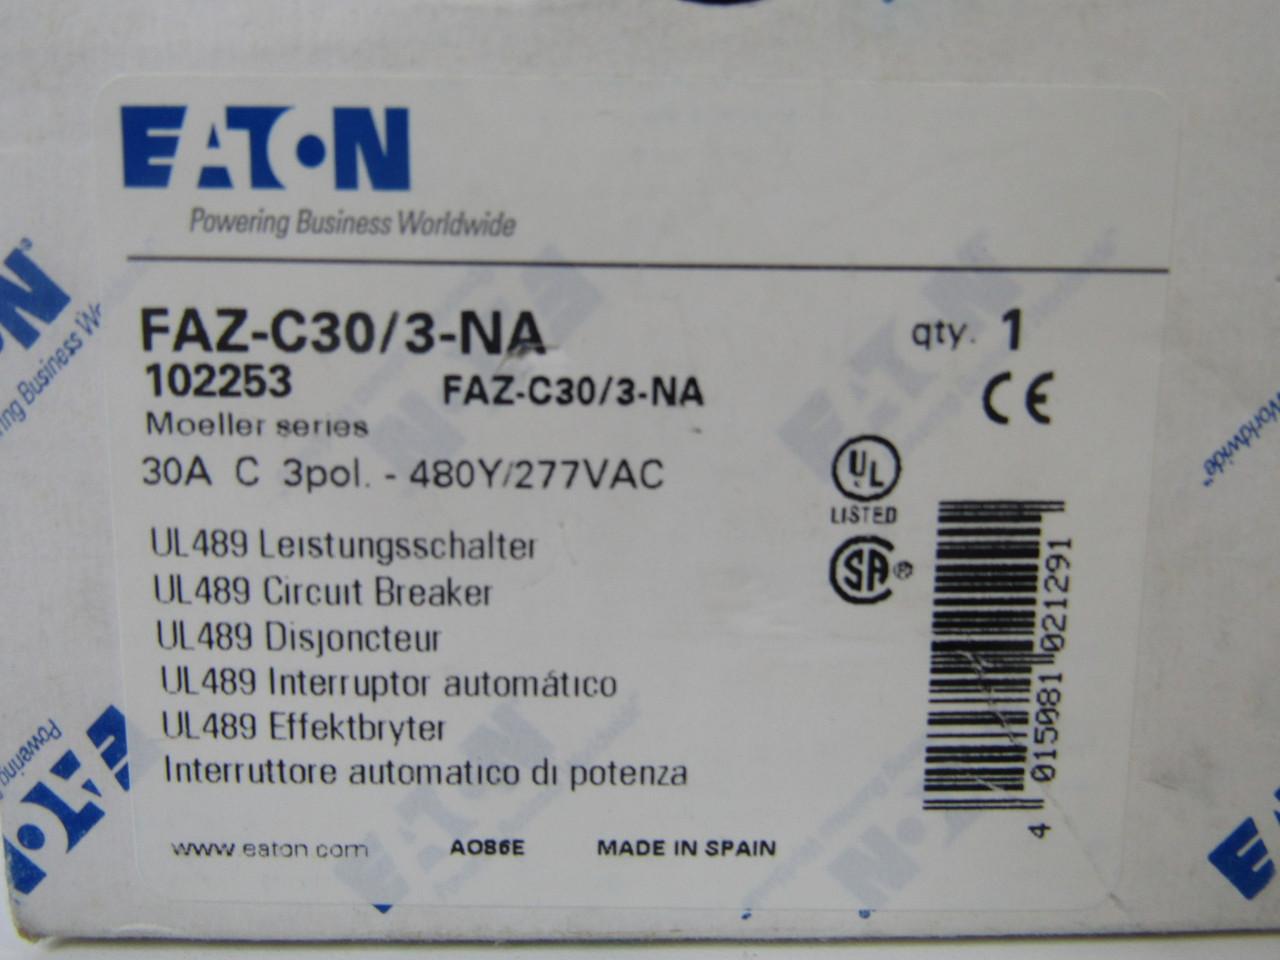 Eaton FAZ-C30/3-NA 277/480 VAC 50/60 Hz, 30 A, 3-Pole, 10/14 kA, 5 to 10 x Rated Current, Screw Terminal, DIN Rail Mount, Standard Packaging, C-Curve, Current Limiting, Thermal Magnetic